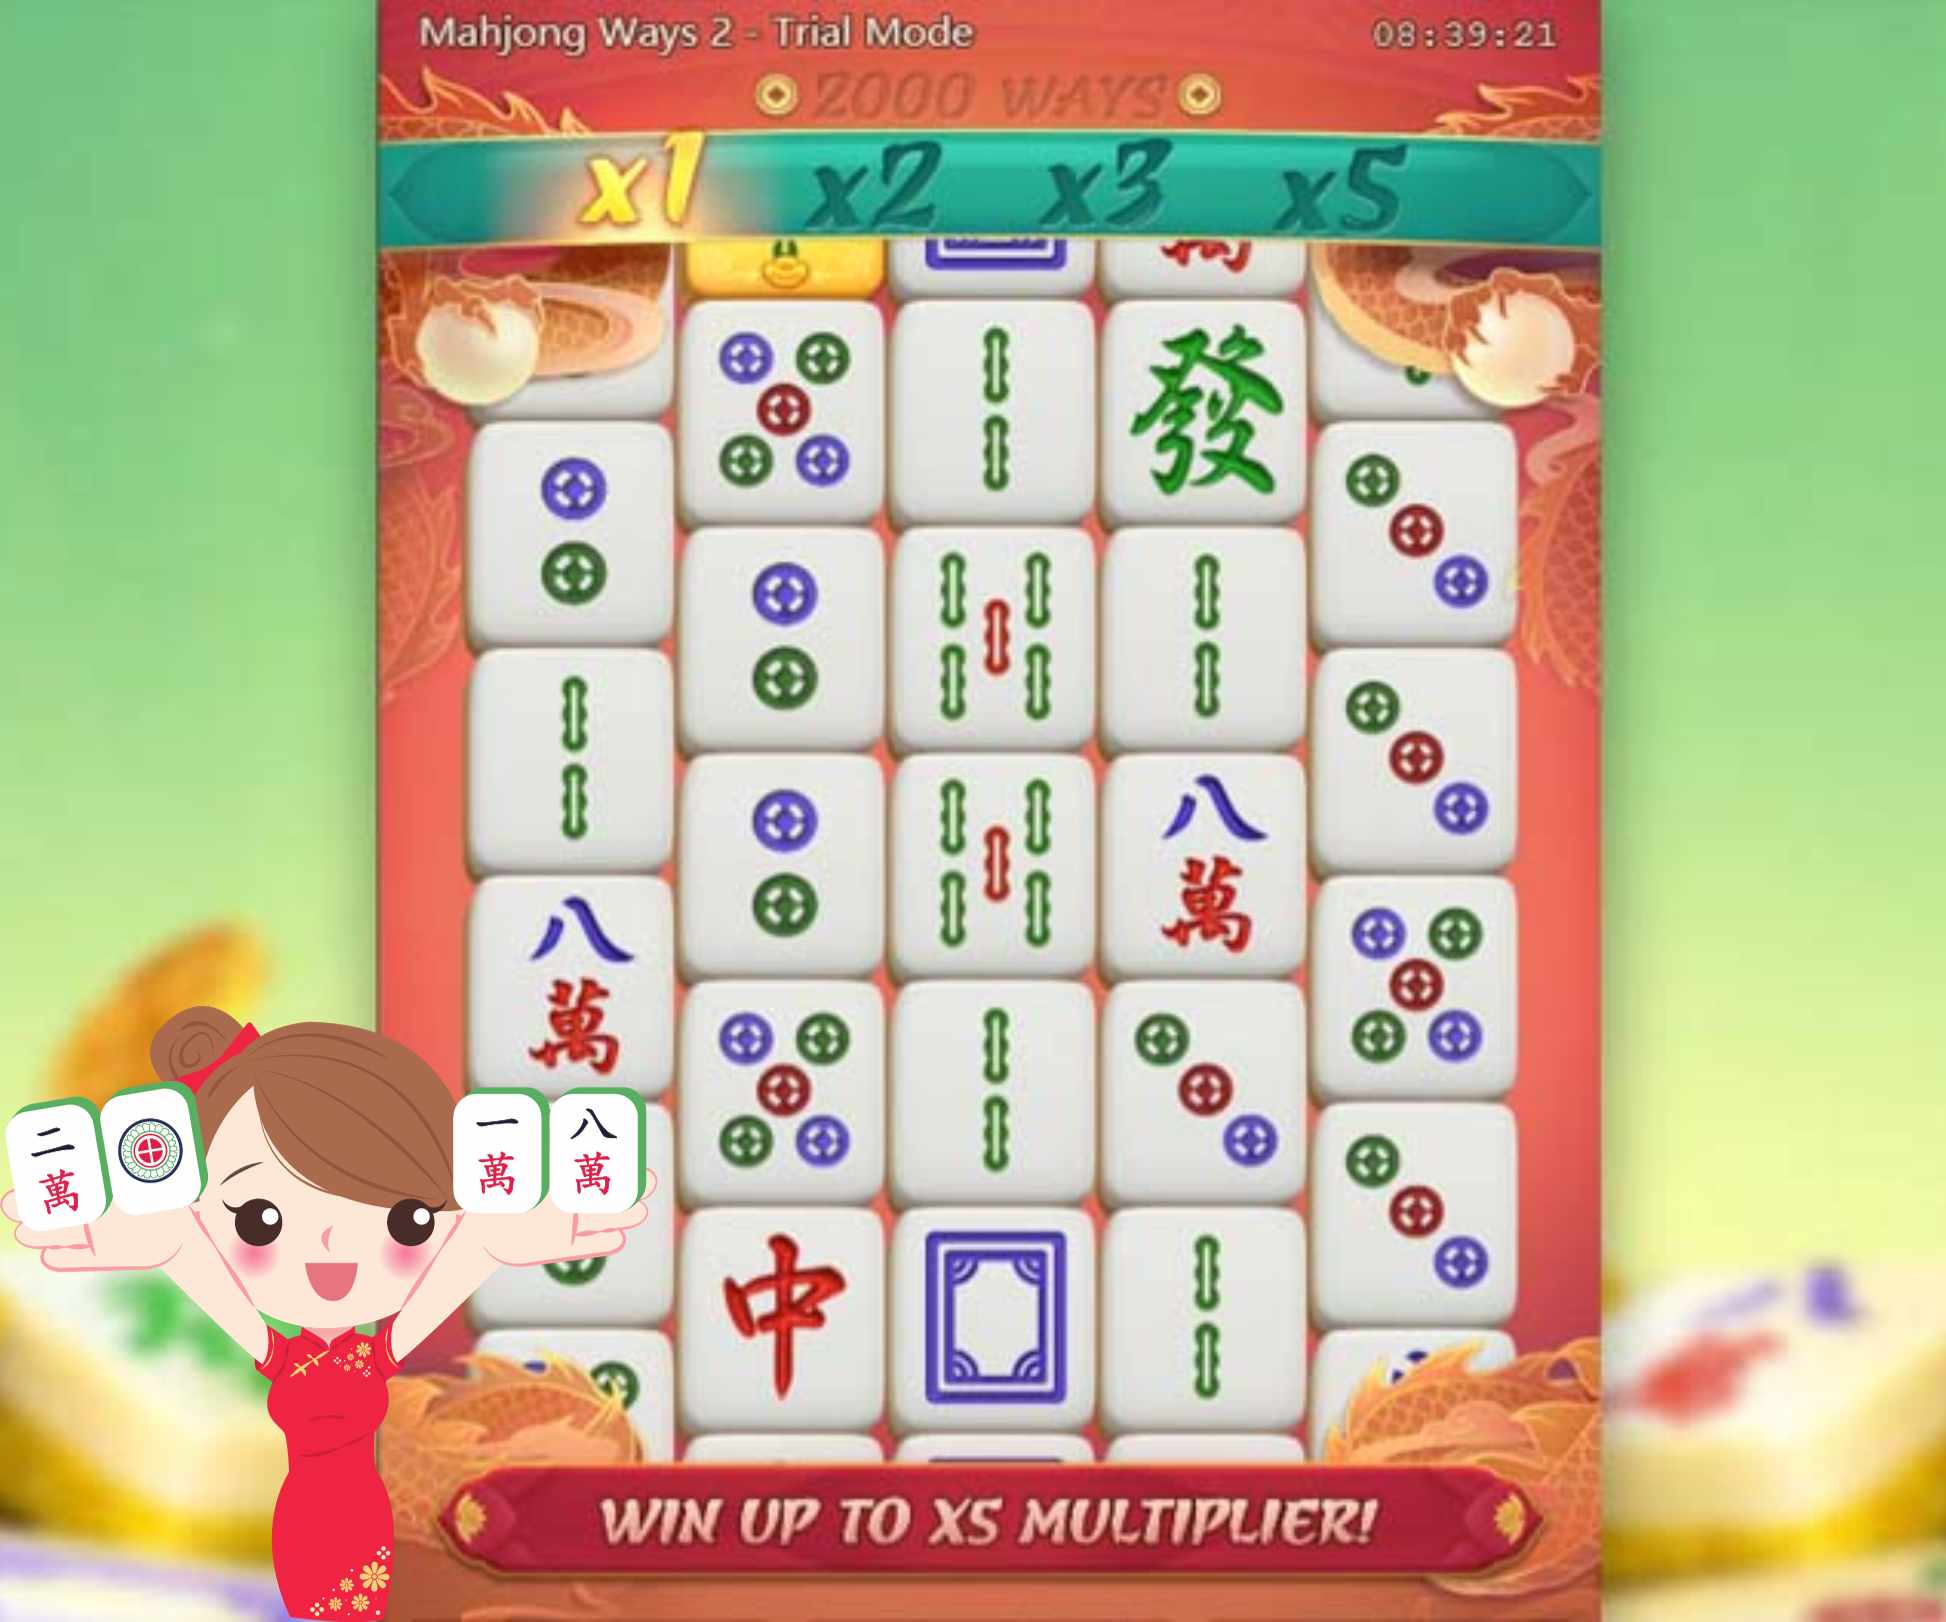 Play Mahjong Ways 2 safely and correctly